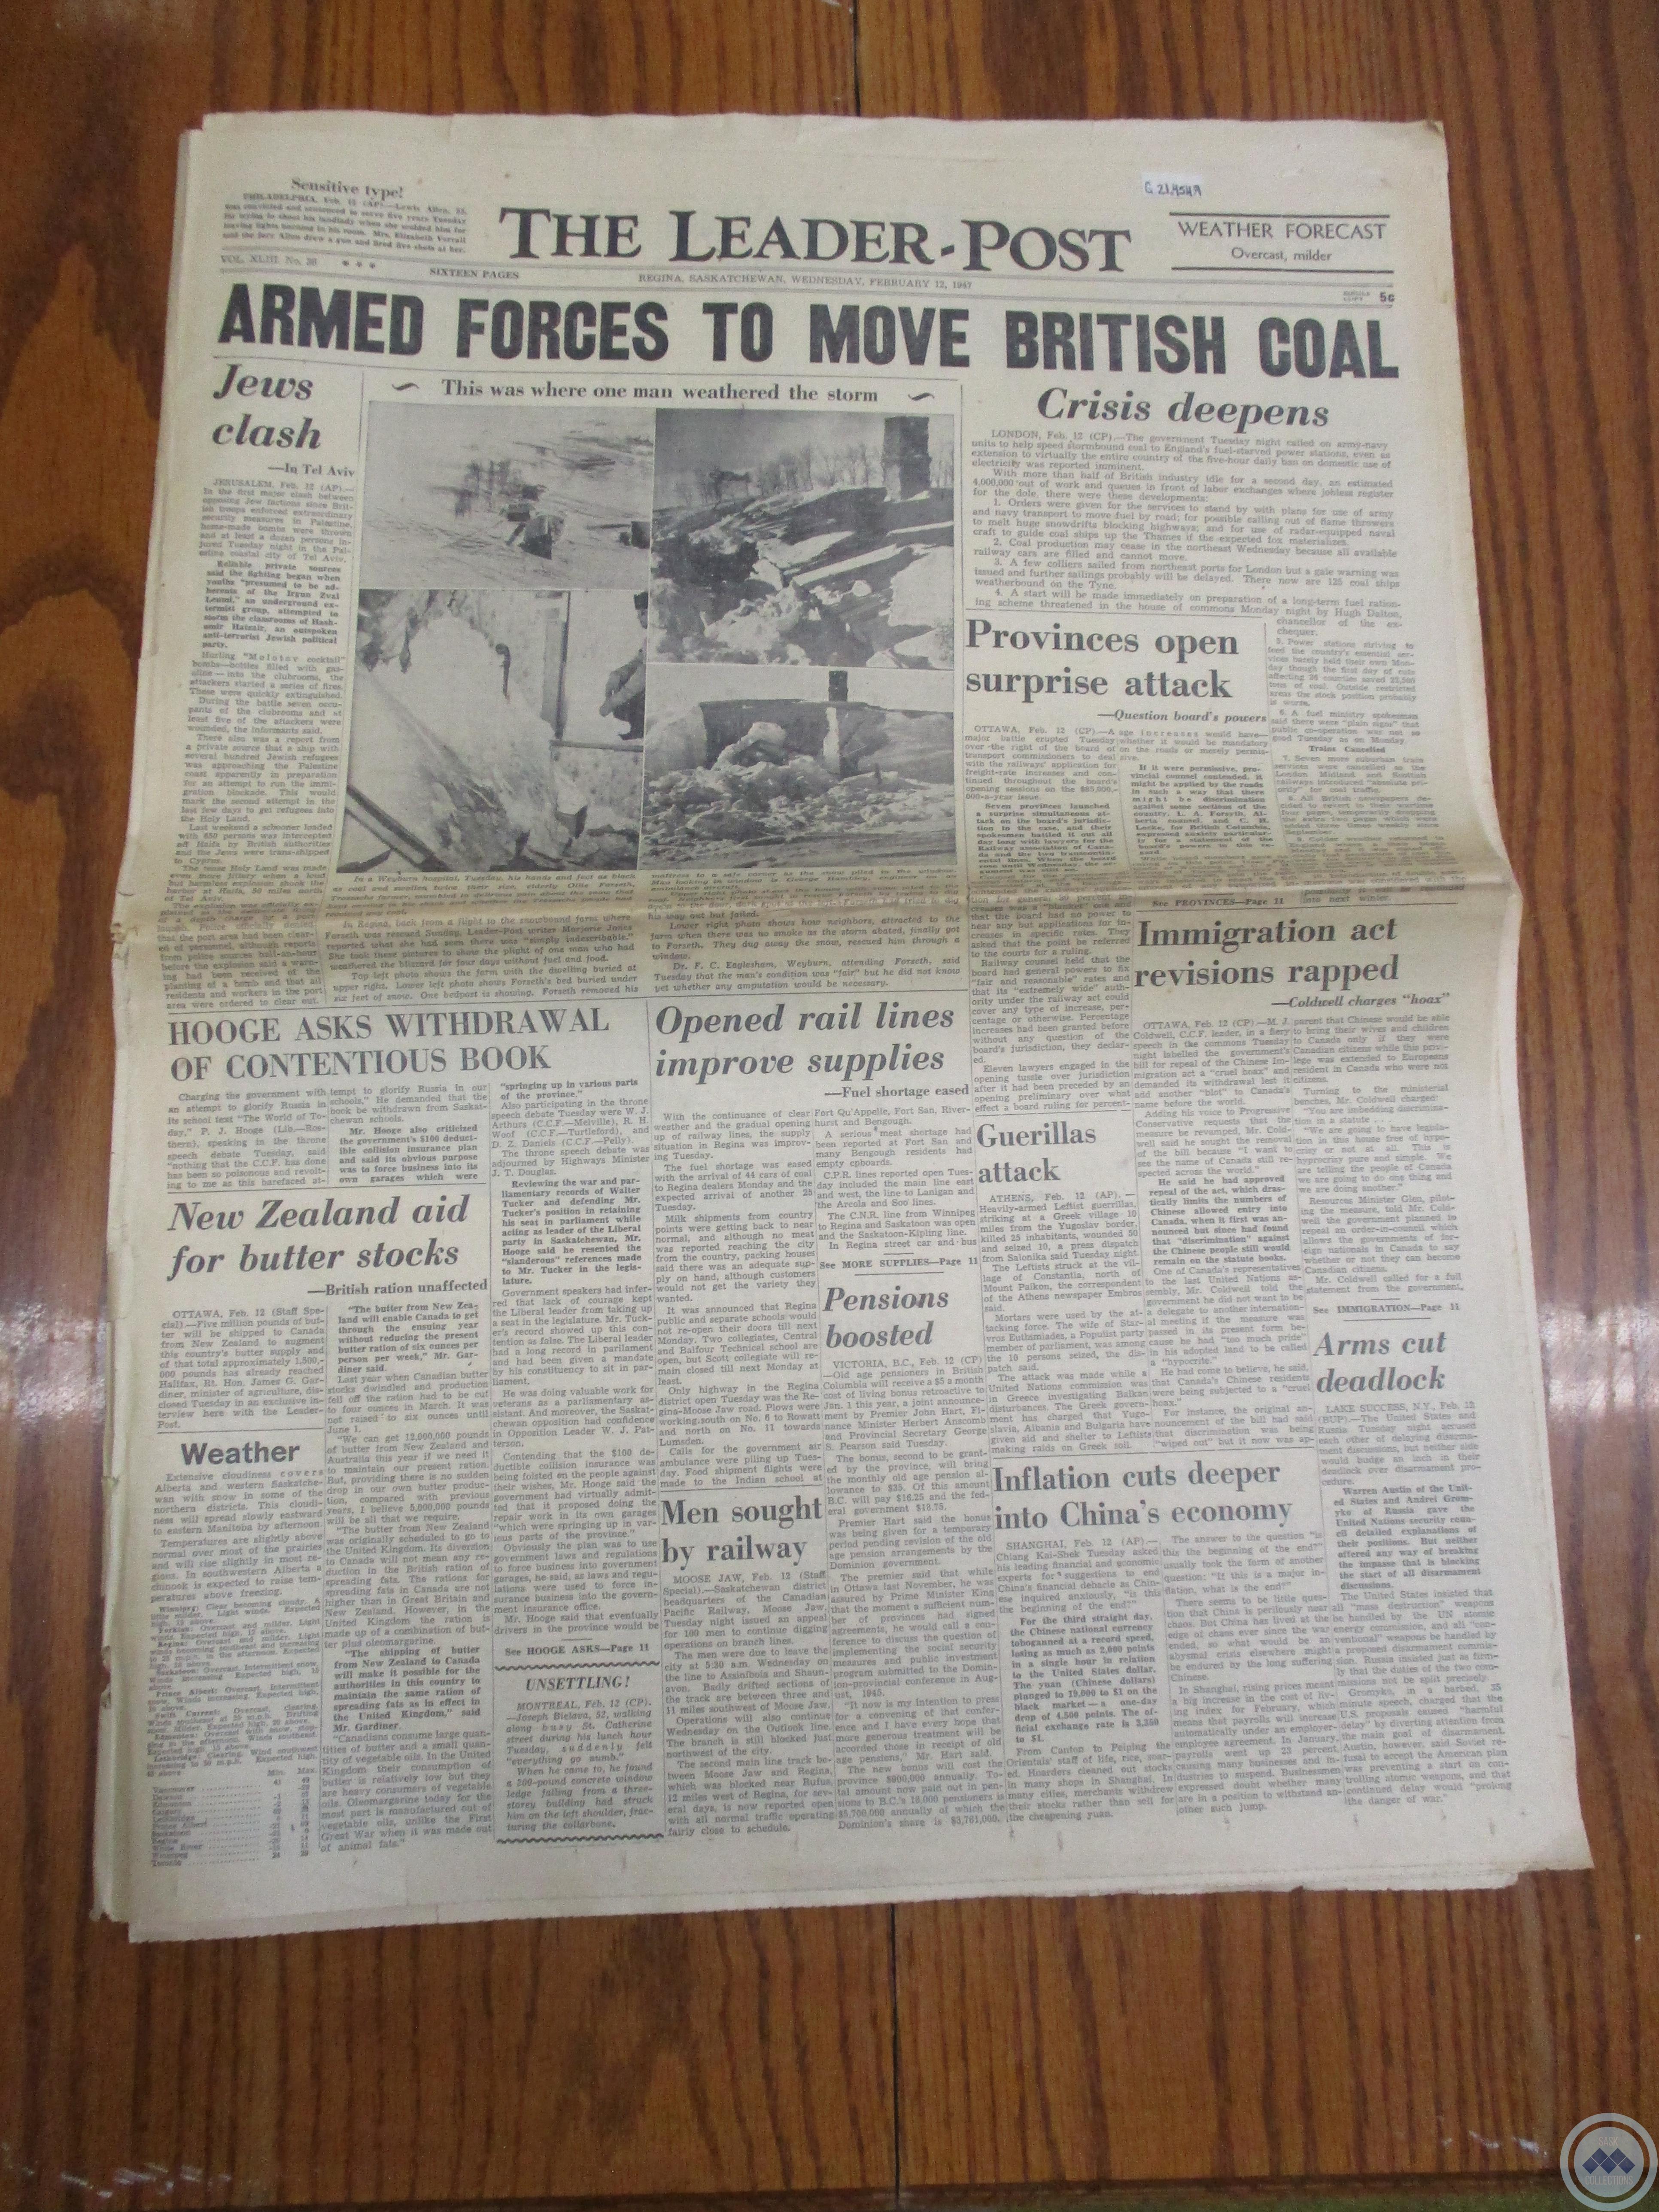 The Leader-Post: “Armed Forces to Move British Coal” (February 12, 1947)